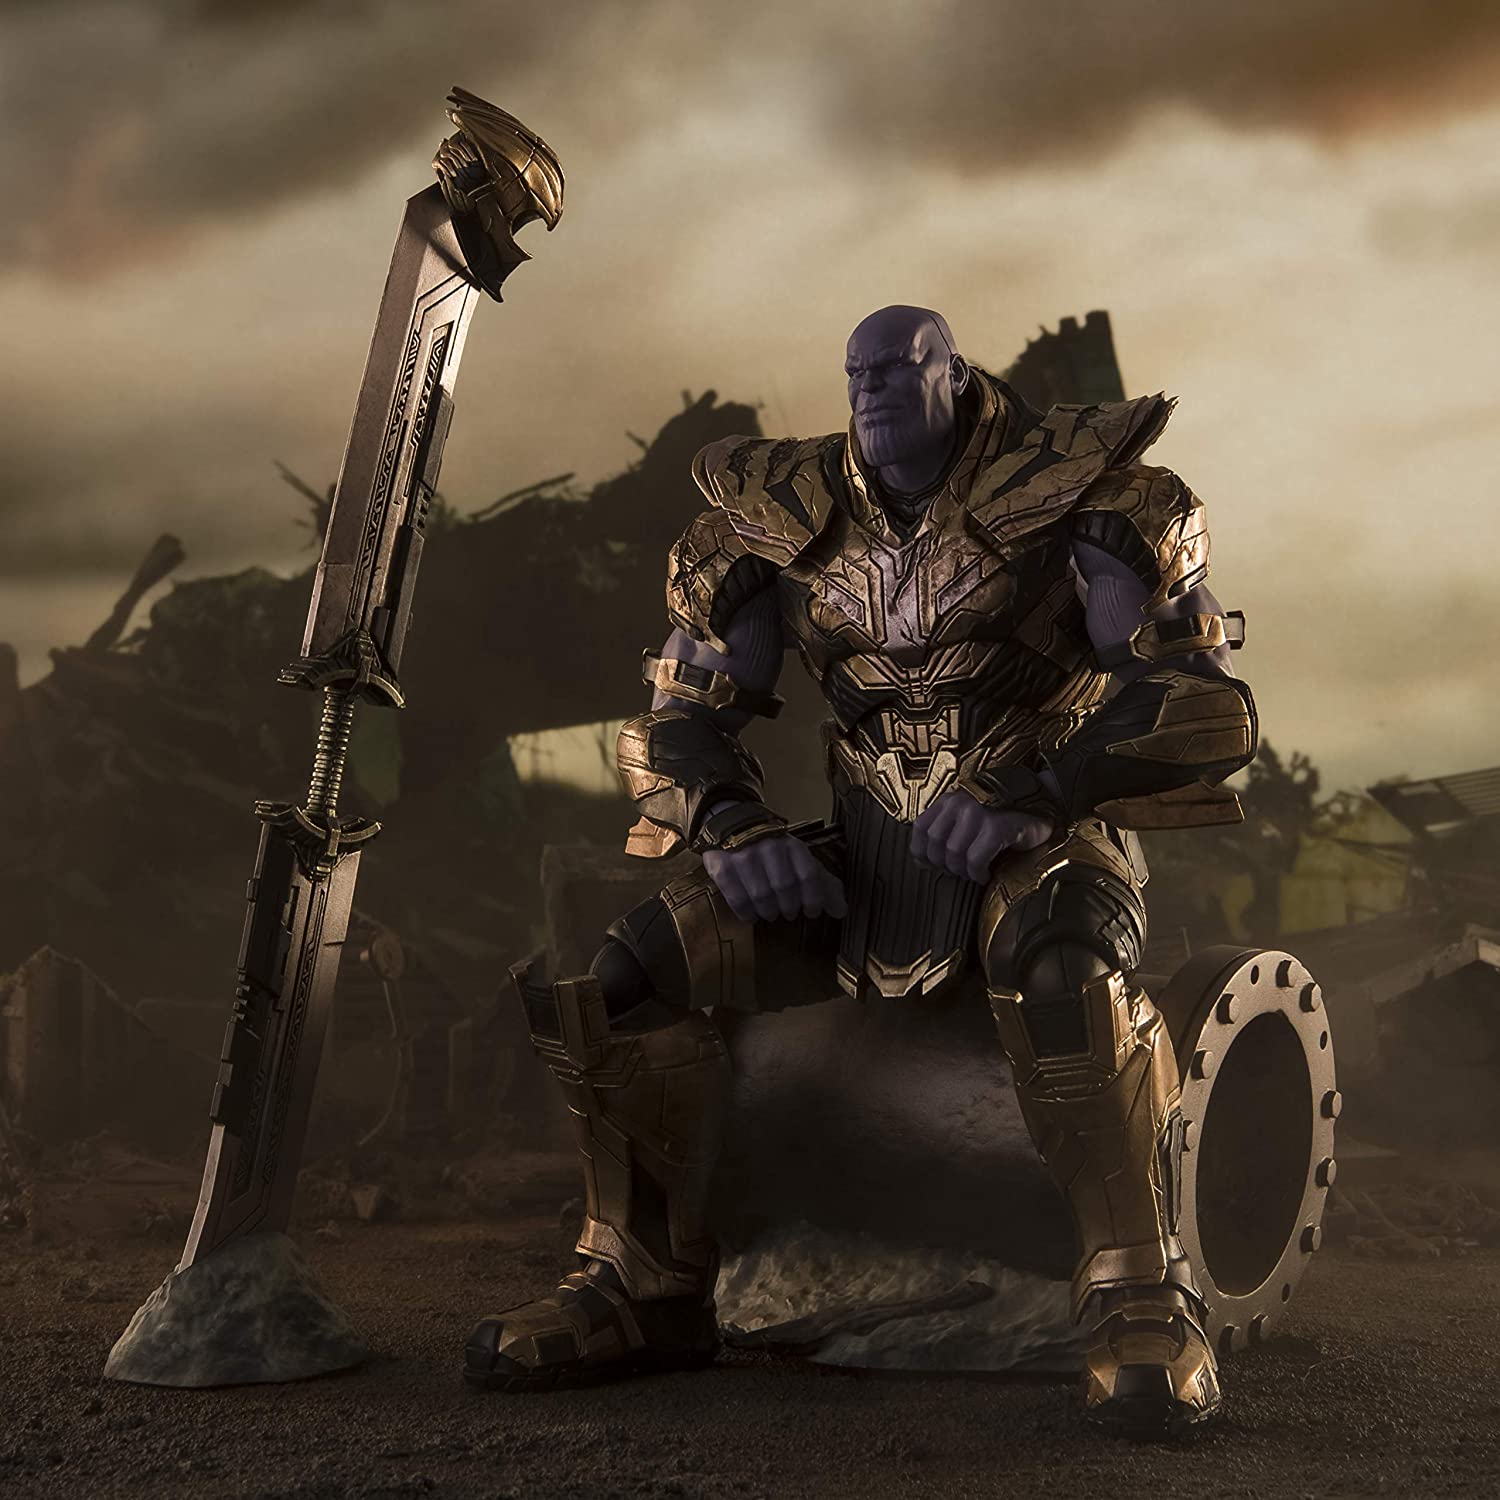 Thanos New Weapon In Avengers Endgame Art Wallpapers